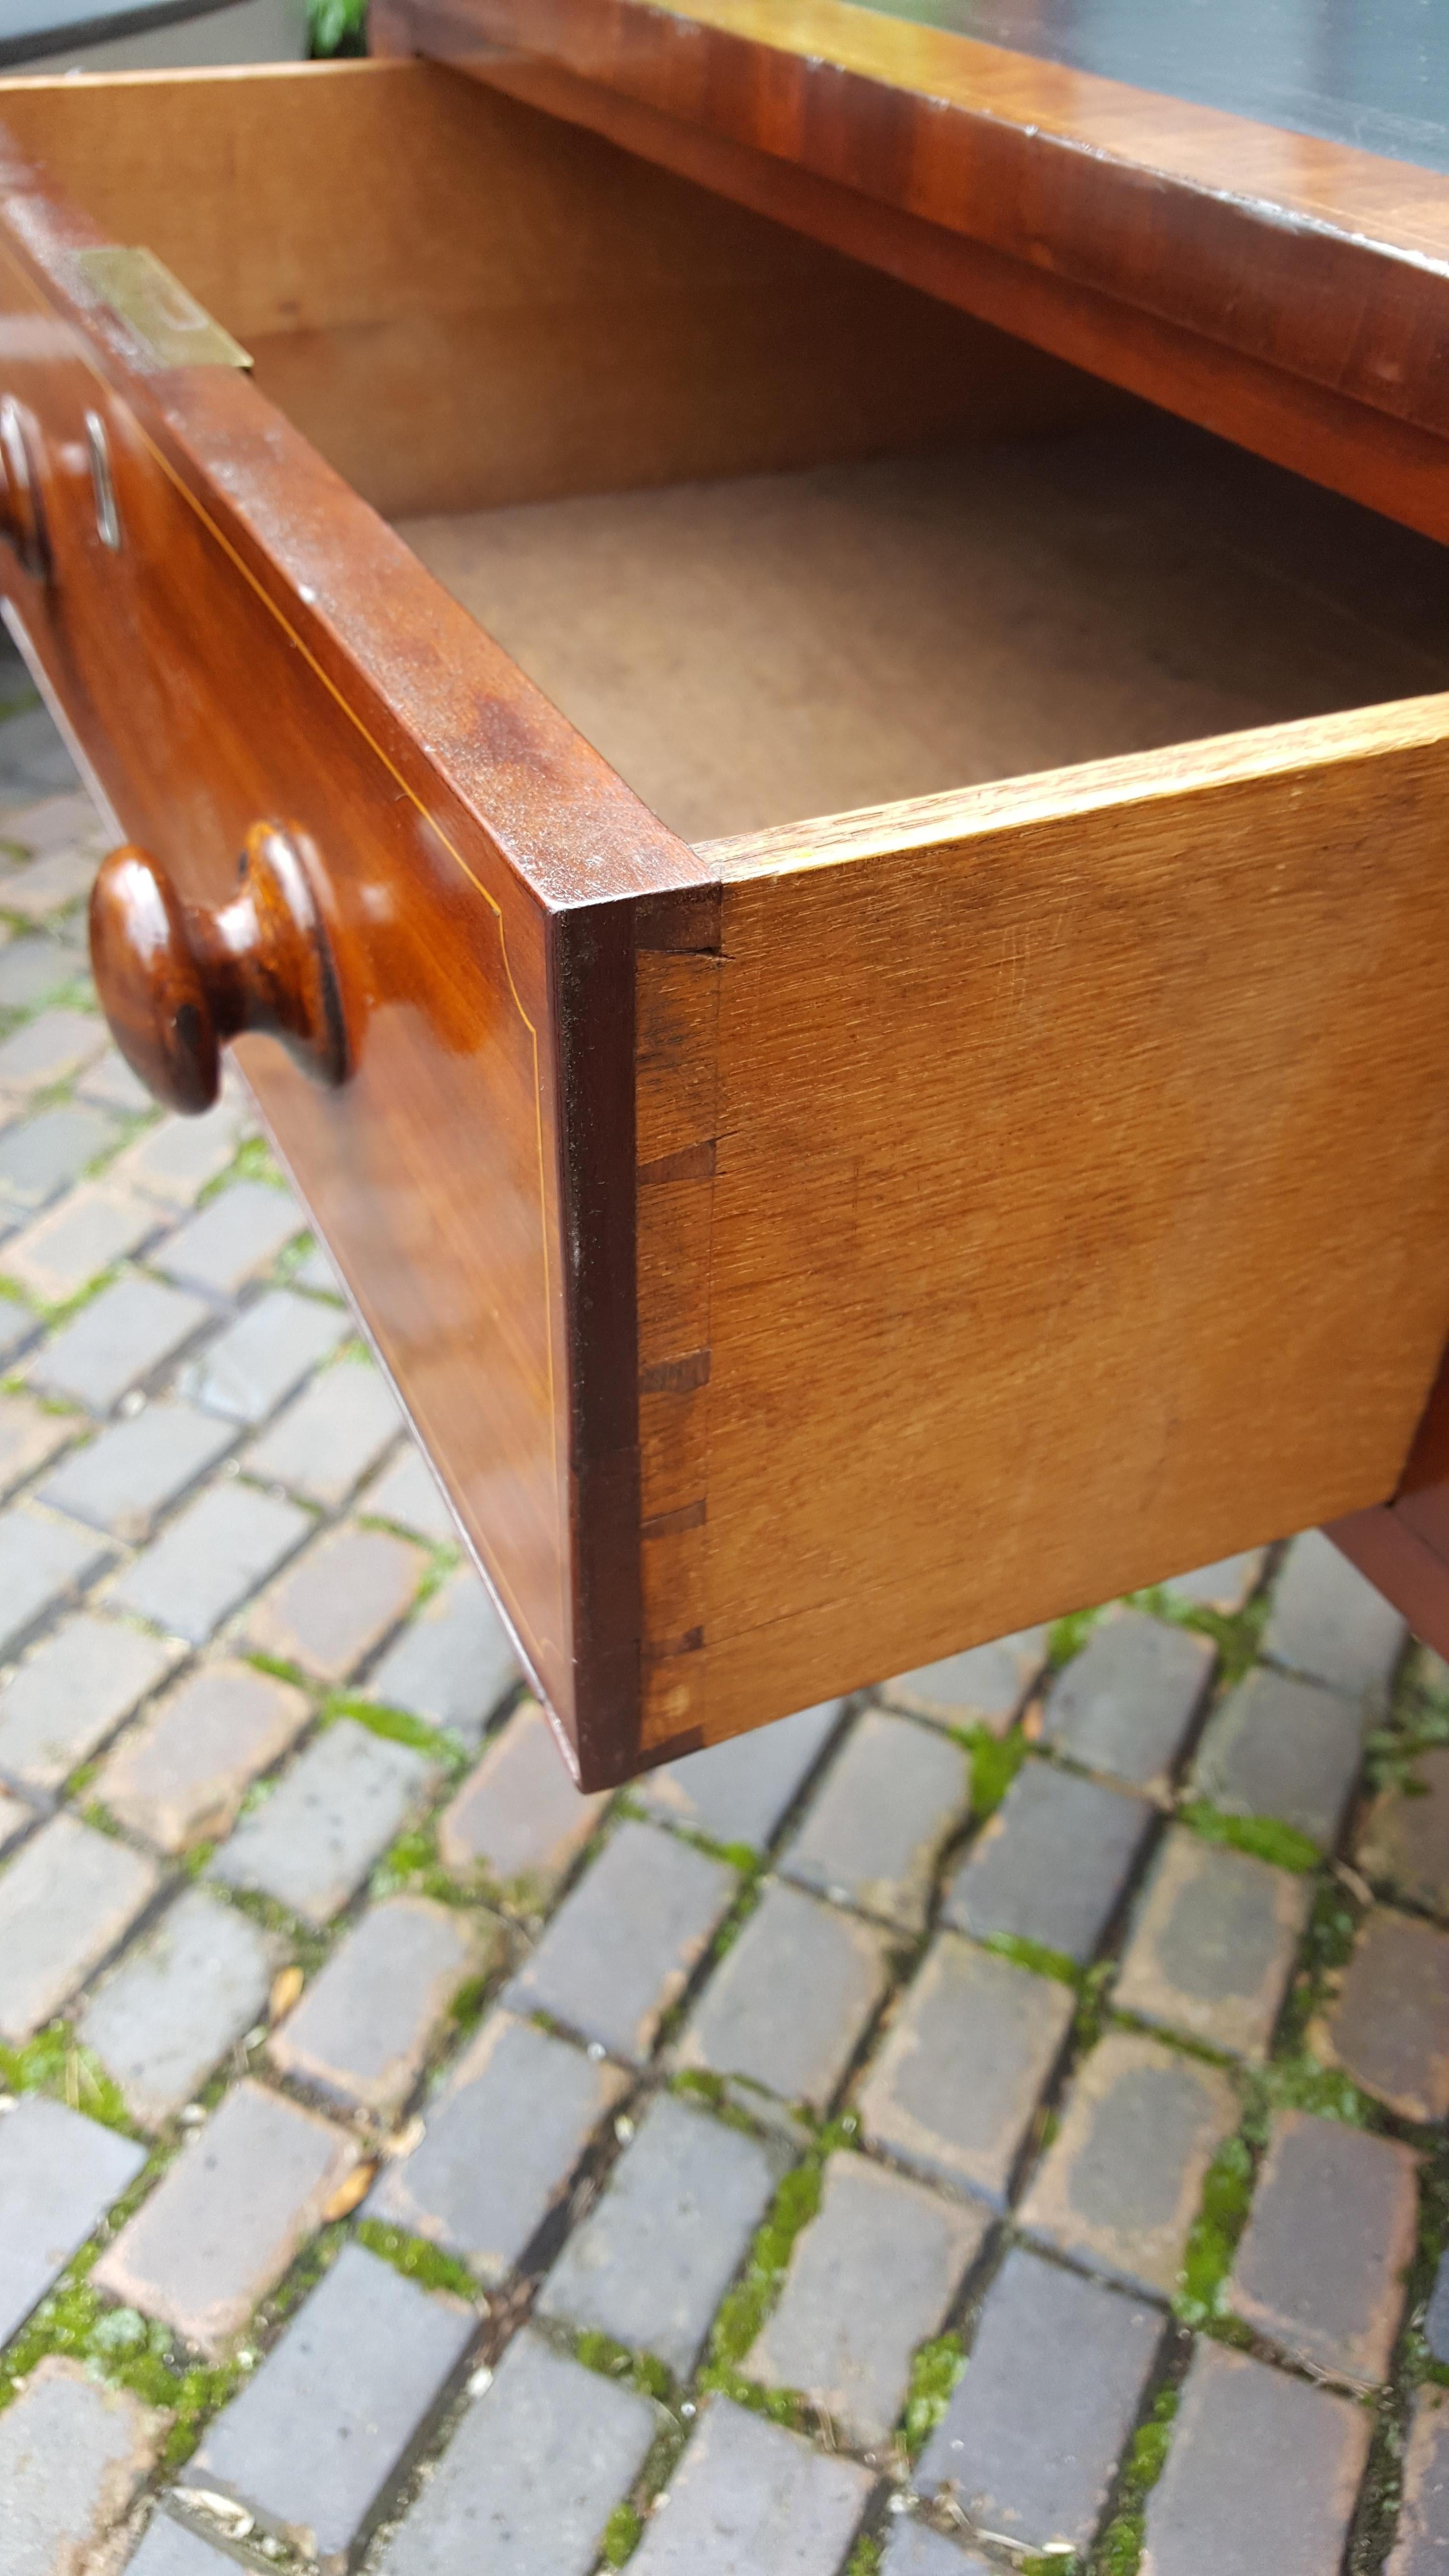 Late George III Mahogany Desk In Good Condition For Sale In Altrincham, GB